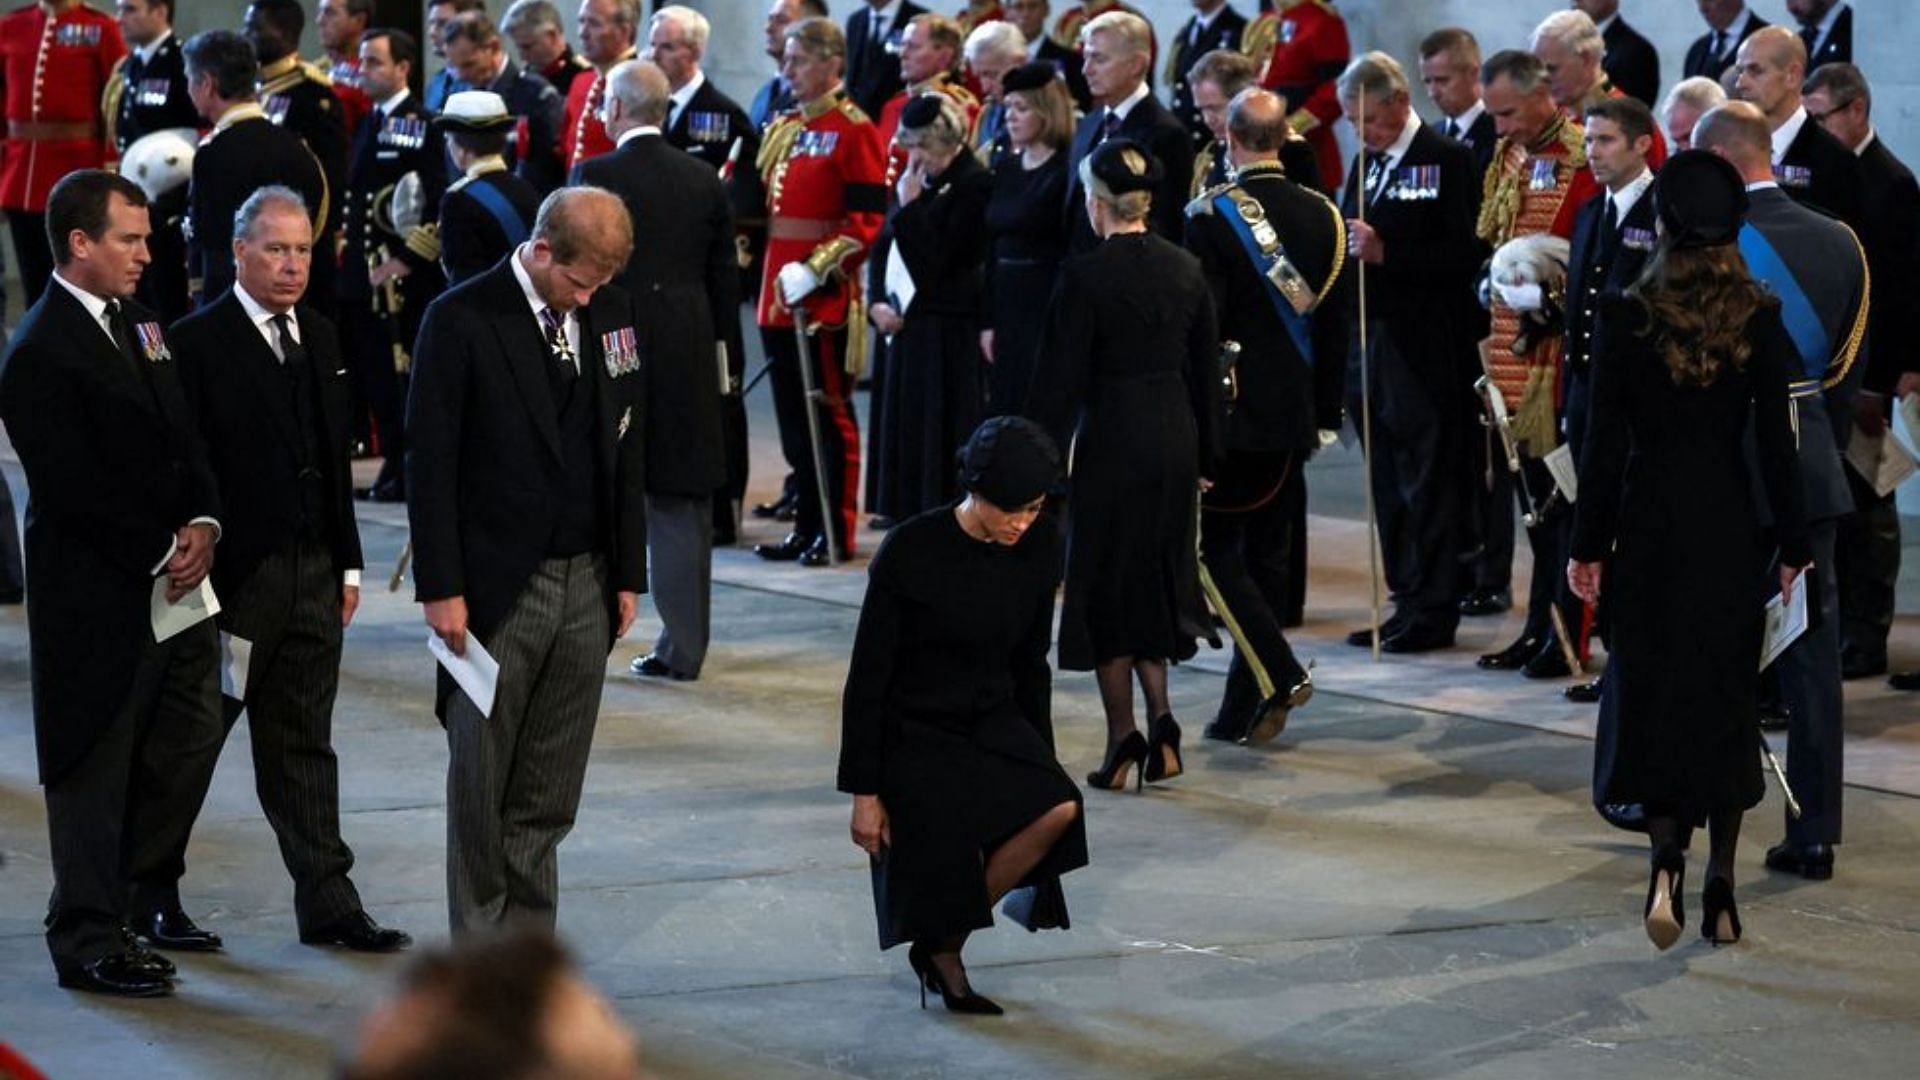 The Sussex royals paying their respects to the Queen. (Image via Alkis Konstantinidis/Getty Images)